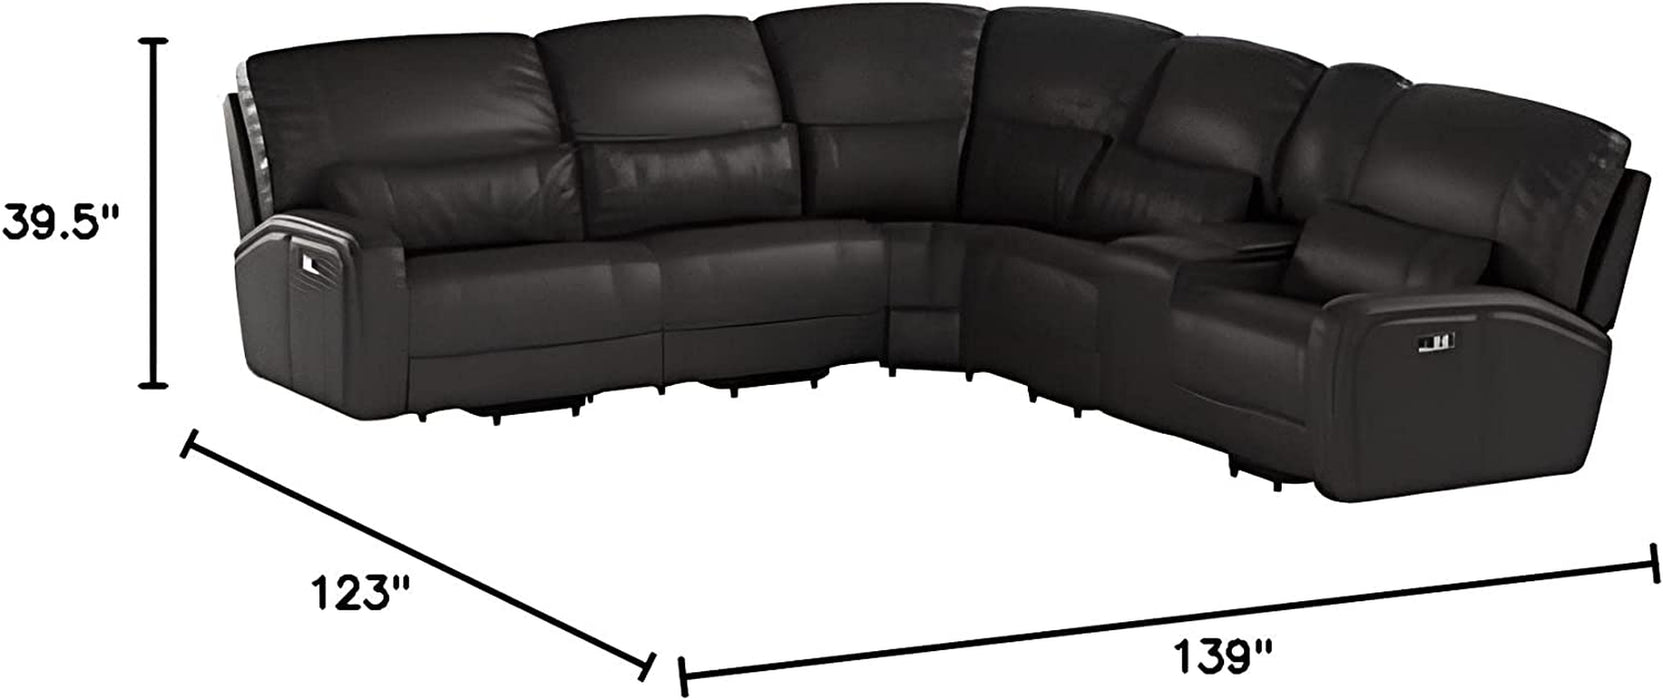 Gray Power Motion Sectional with USB Dock